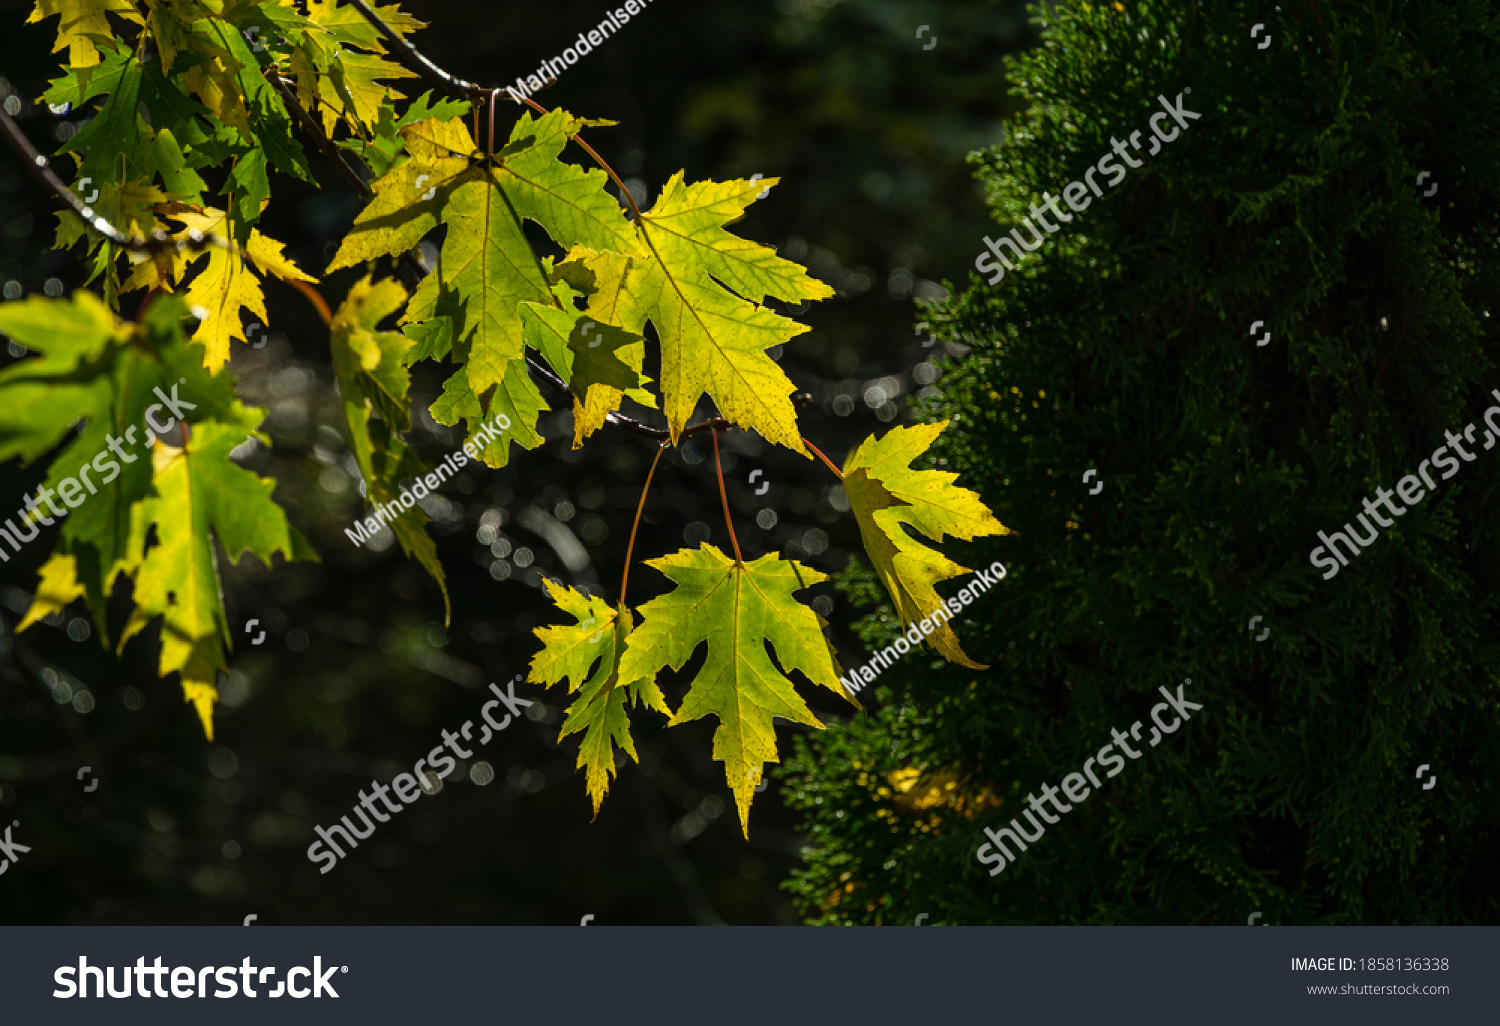 Maple Acer saccharinum with  green leaves against sun. Close-up bright foliage on Acer saccharinum on dark greenery background. Nature concept for any design. Selective focus. Place for your text #1858136338